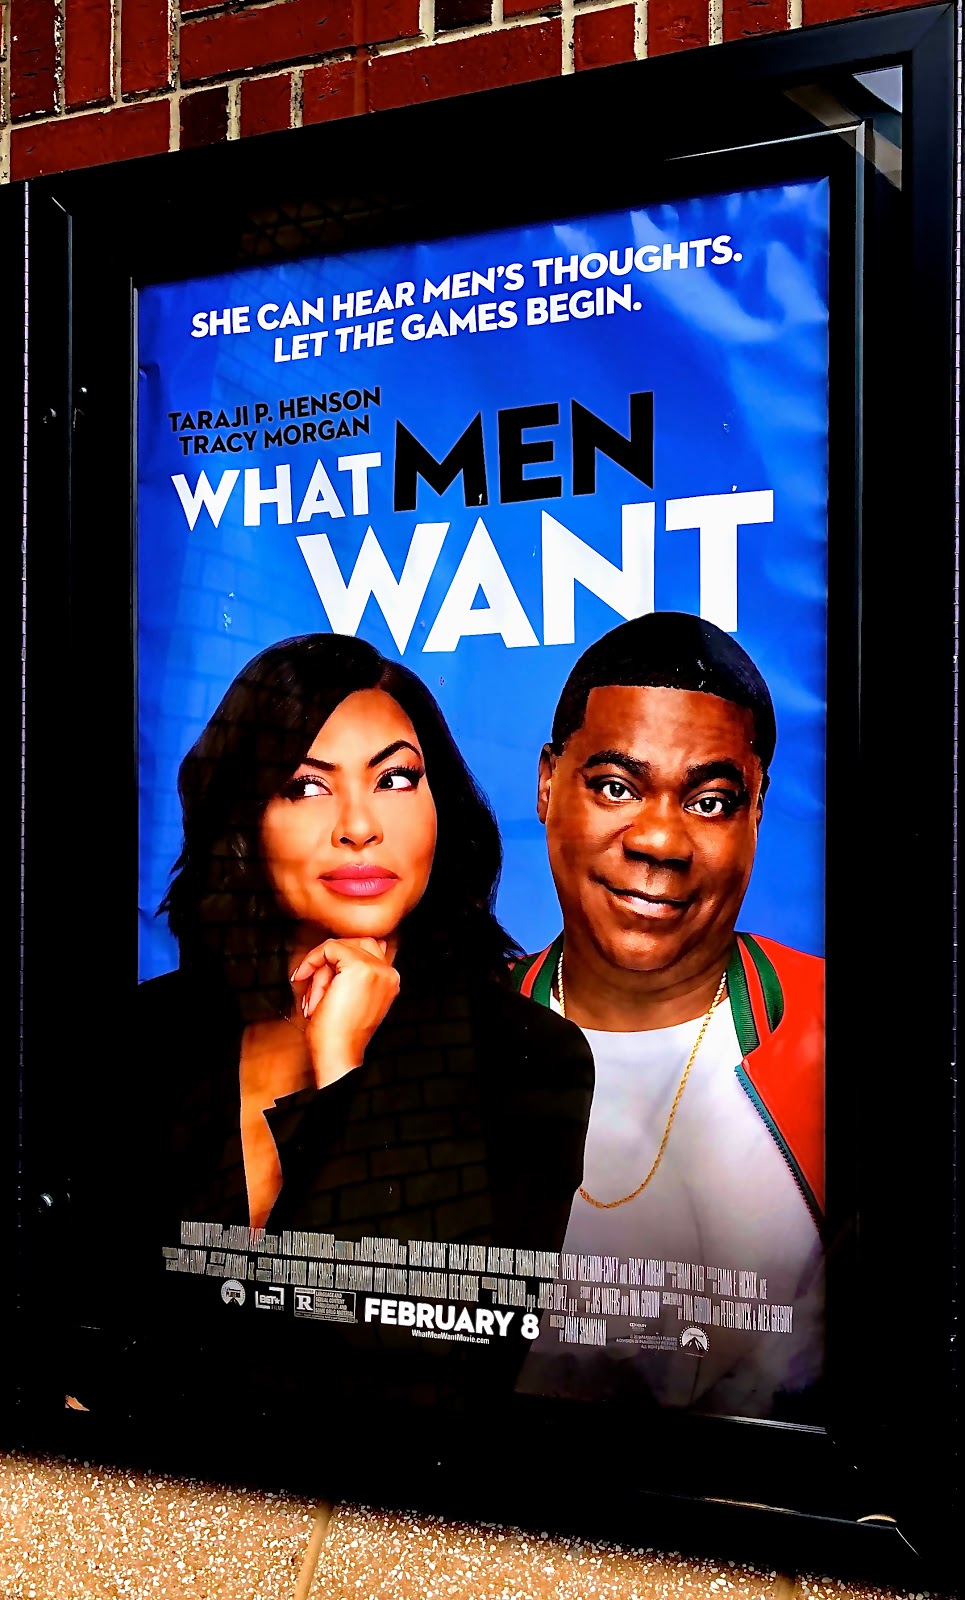 What Men Want Movie Review - February 2019 - Blue Skies for Me Please